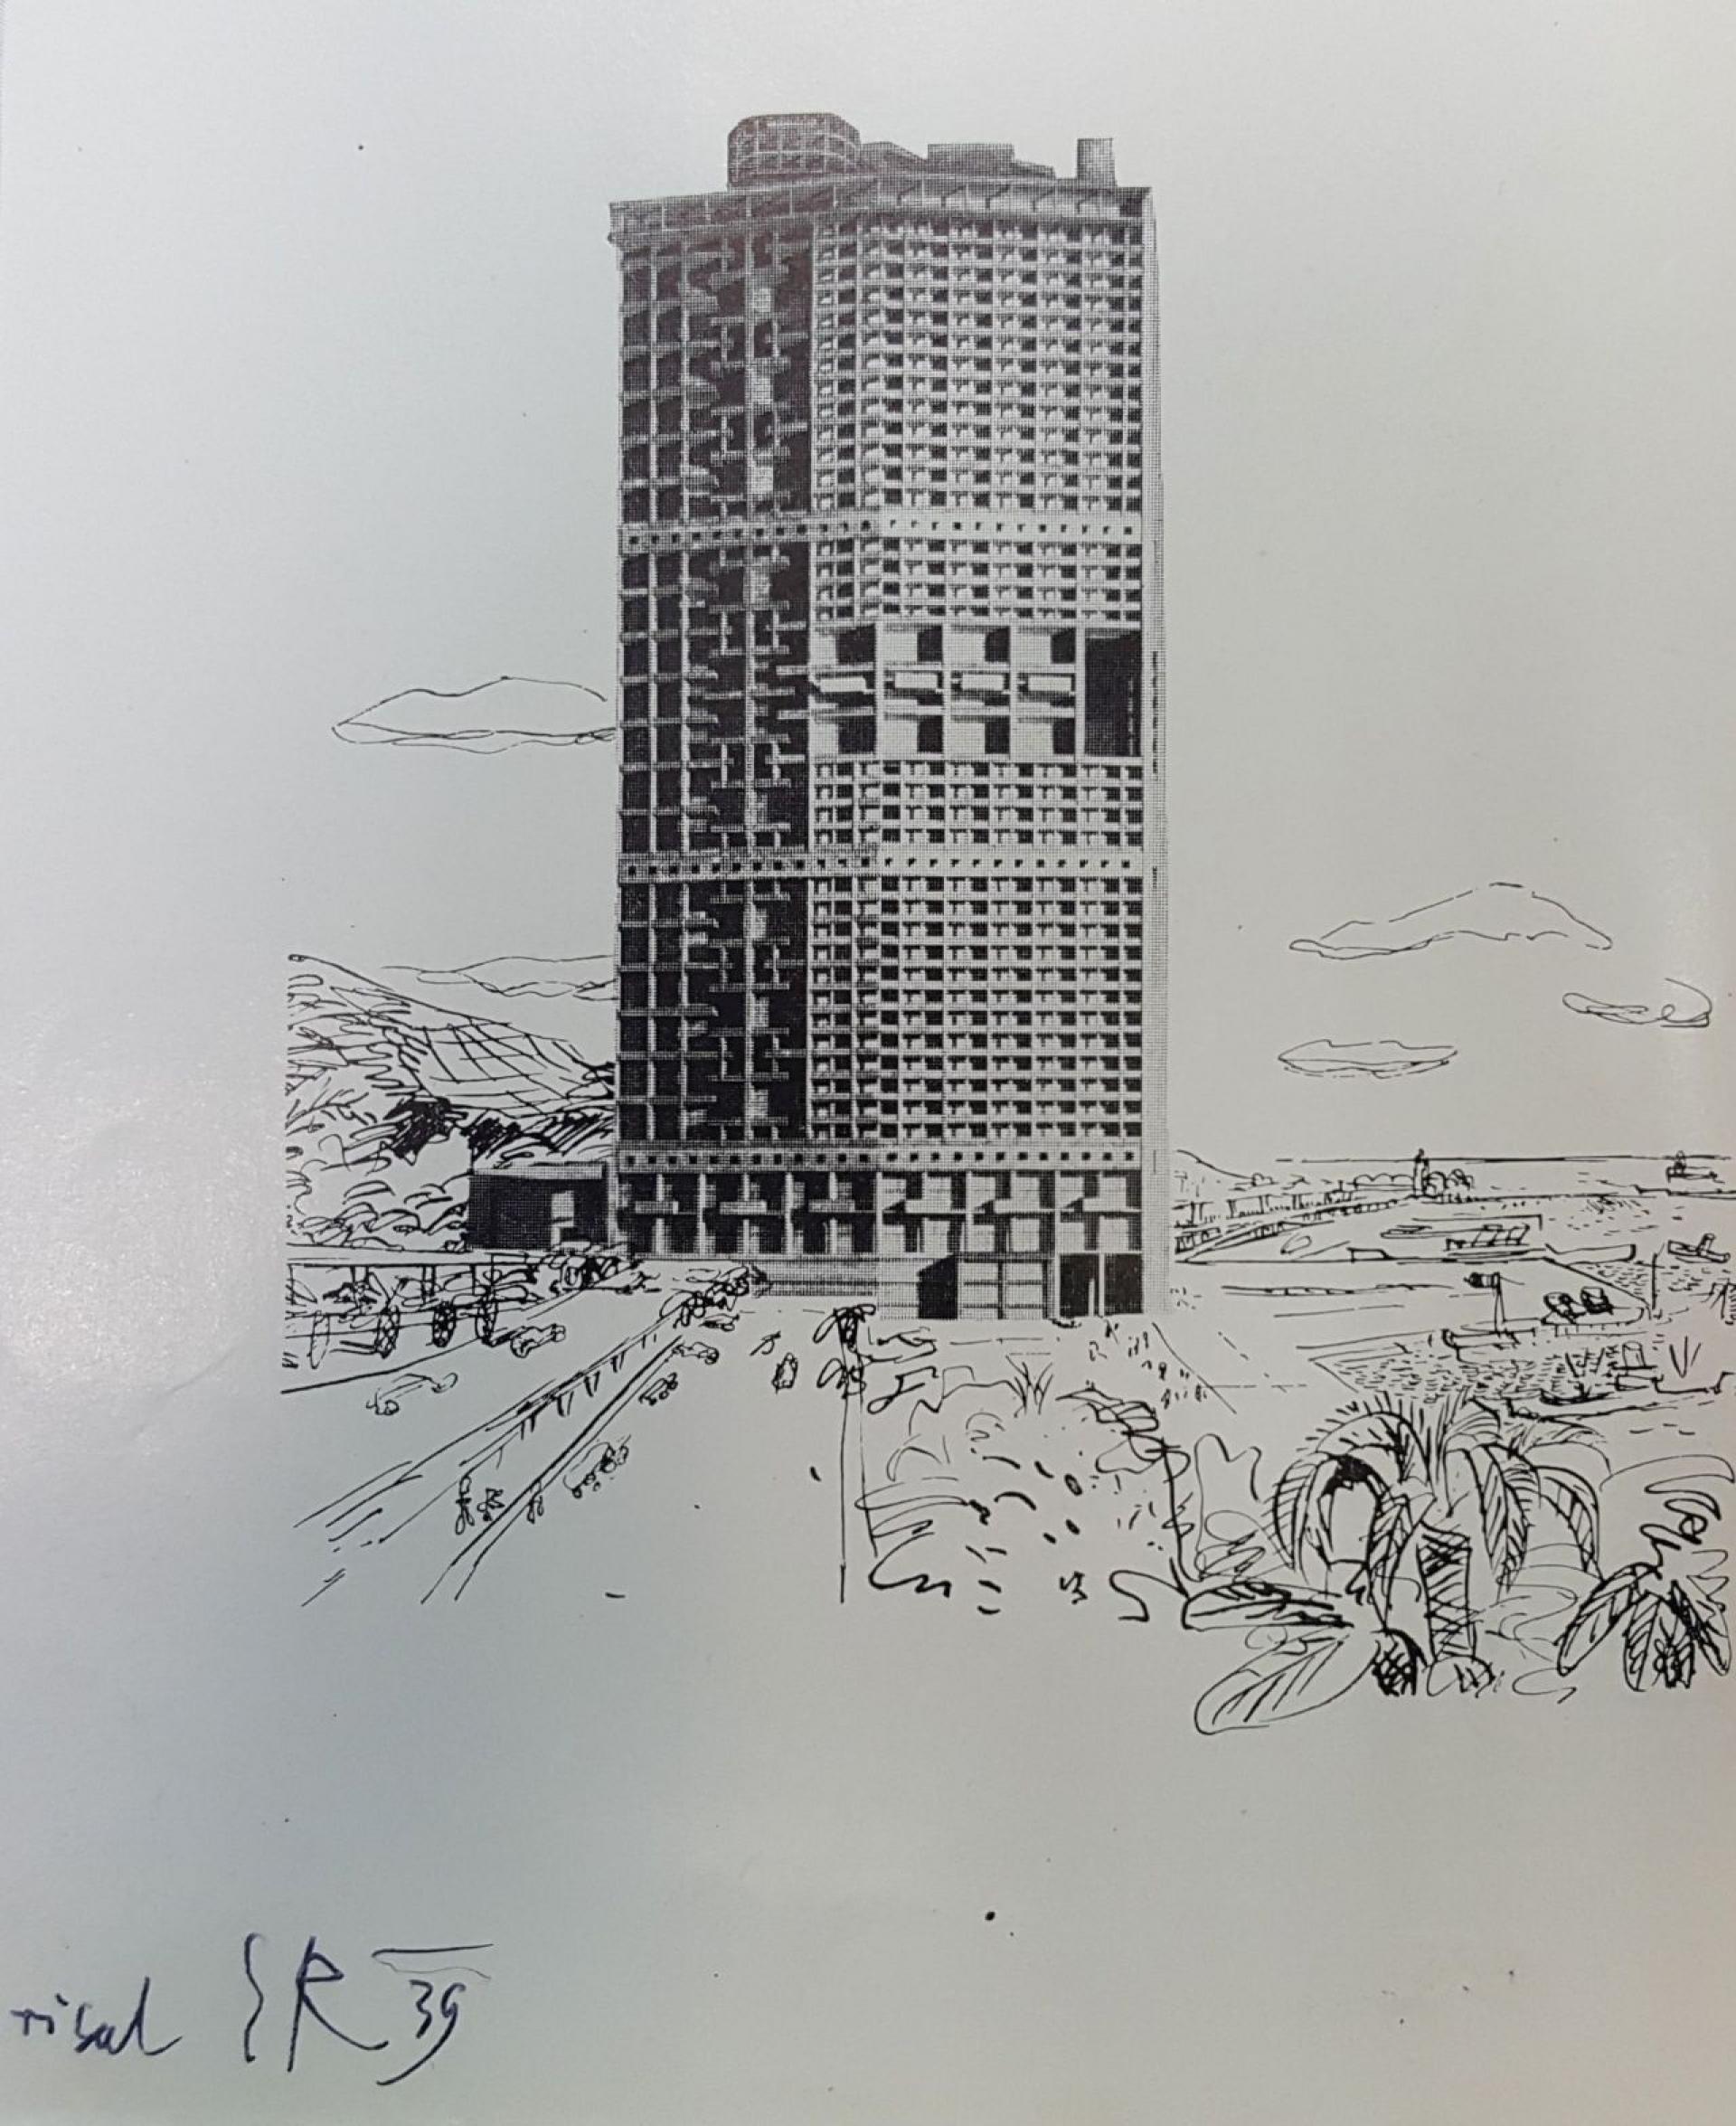 Edvard Ravnikar and Le Corbusier, copy of drawing of Algiers skyscraper with a note: "drawn by ER 39”, from the book Le Corbusier Oeuvre complete 1938-1946. | Source CTK (Central Technical Library), Ljubljana